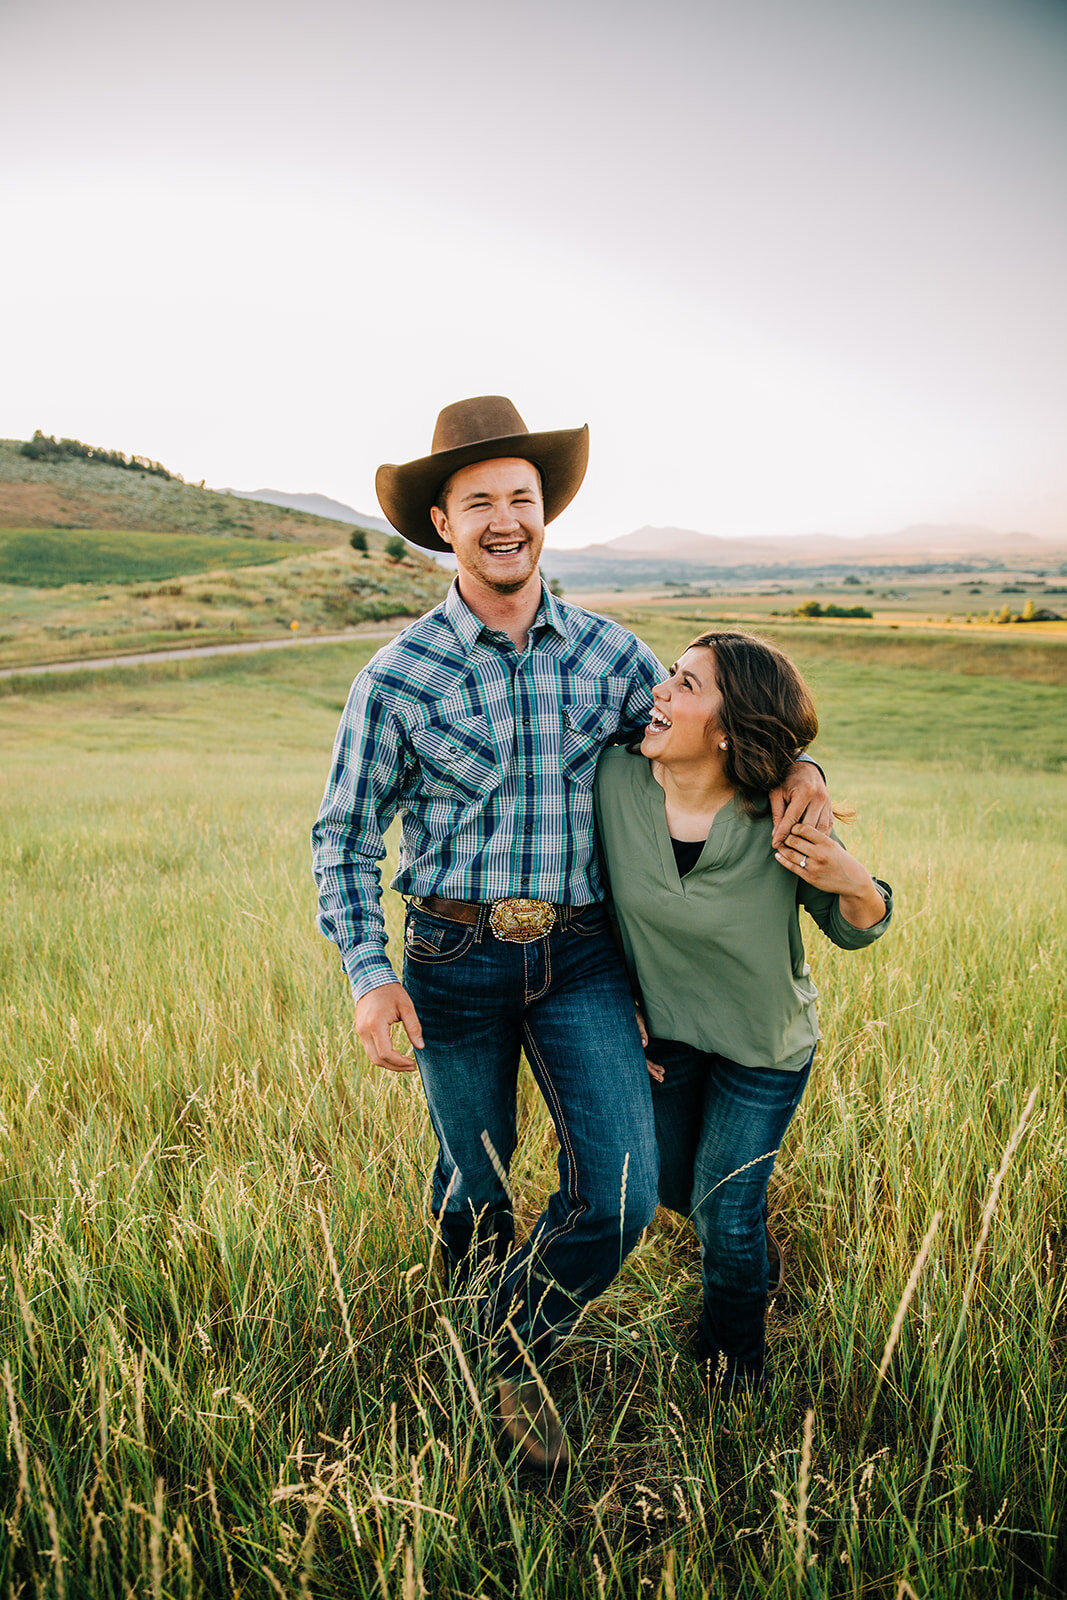  summer time engagement session walking posing ideas for couples casual outfit inspo what to wear to engagement session bright smiles laughing happy couple women hairstyle inspo hat styling ideas simple background green field and wildflowers paradise